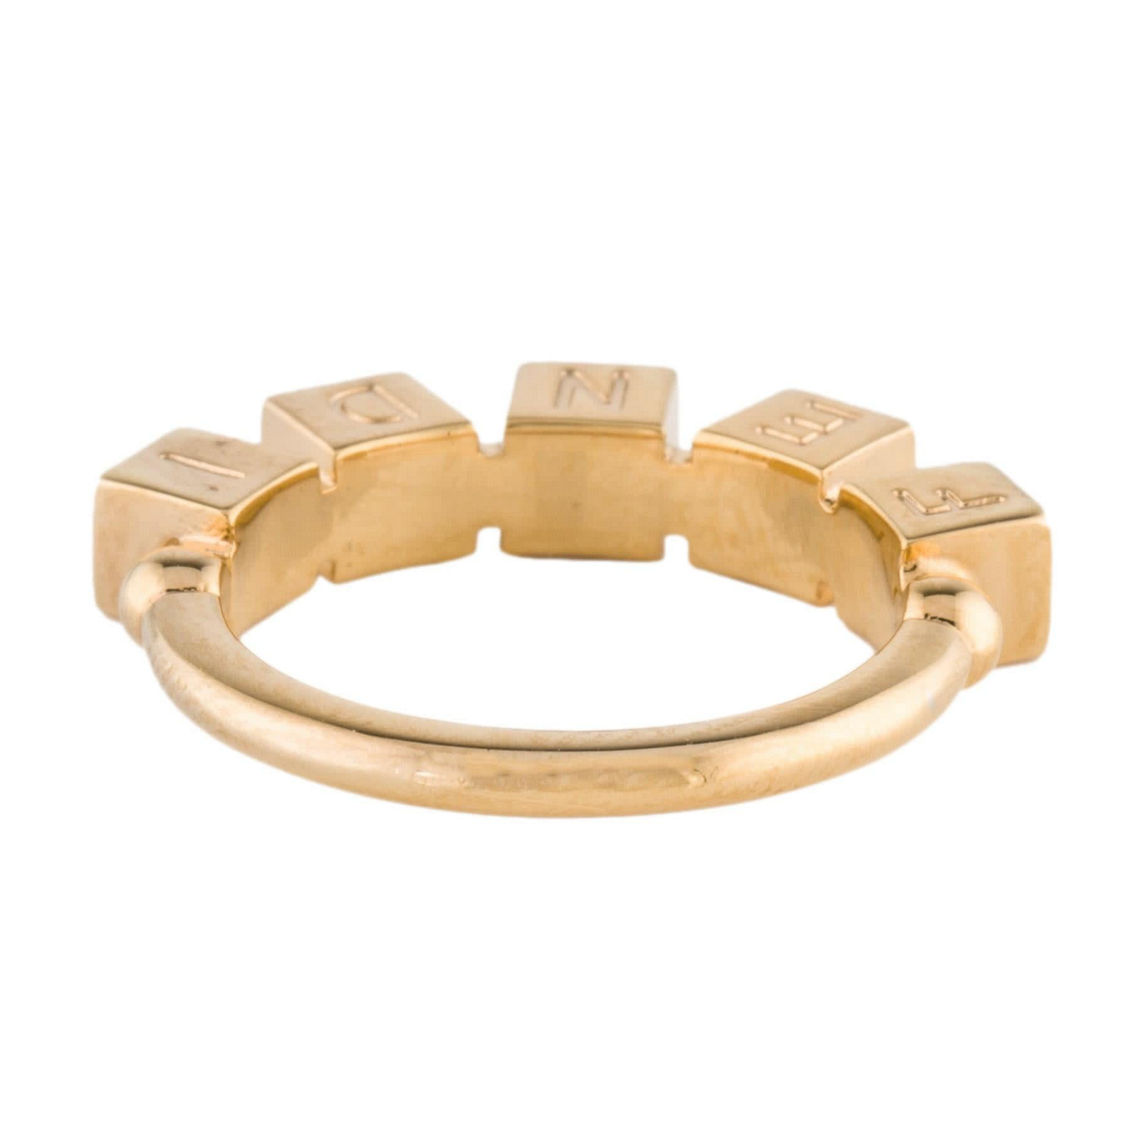 Fendi Fendigraphy Letters Gold Metal Ring Size Small (New) - Image 3 of 4